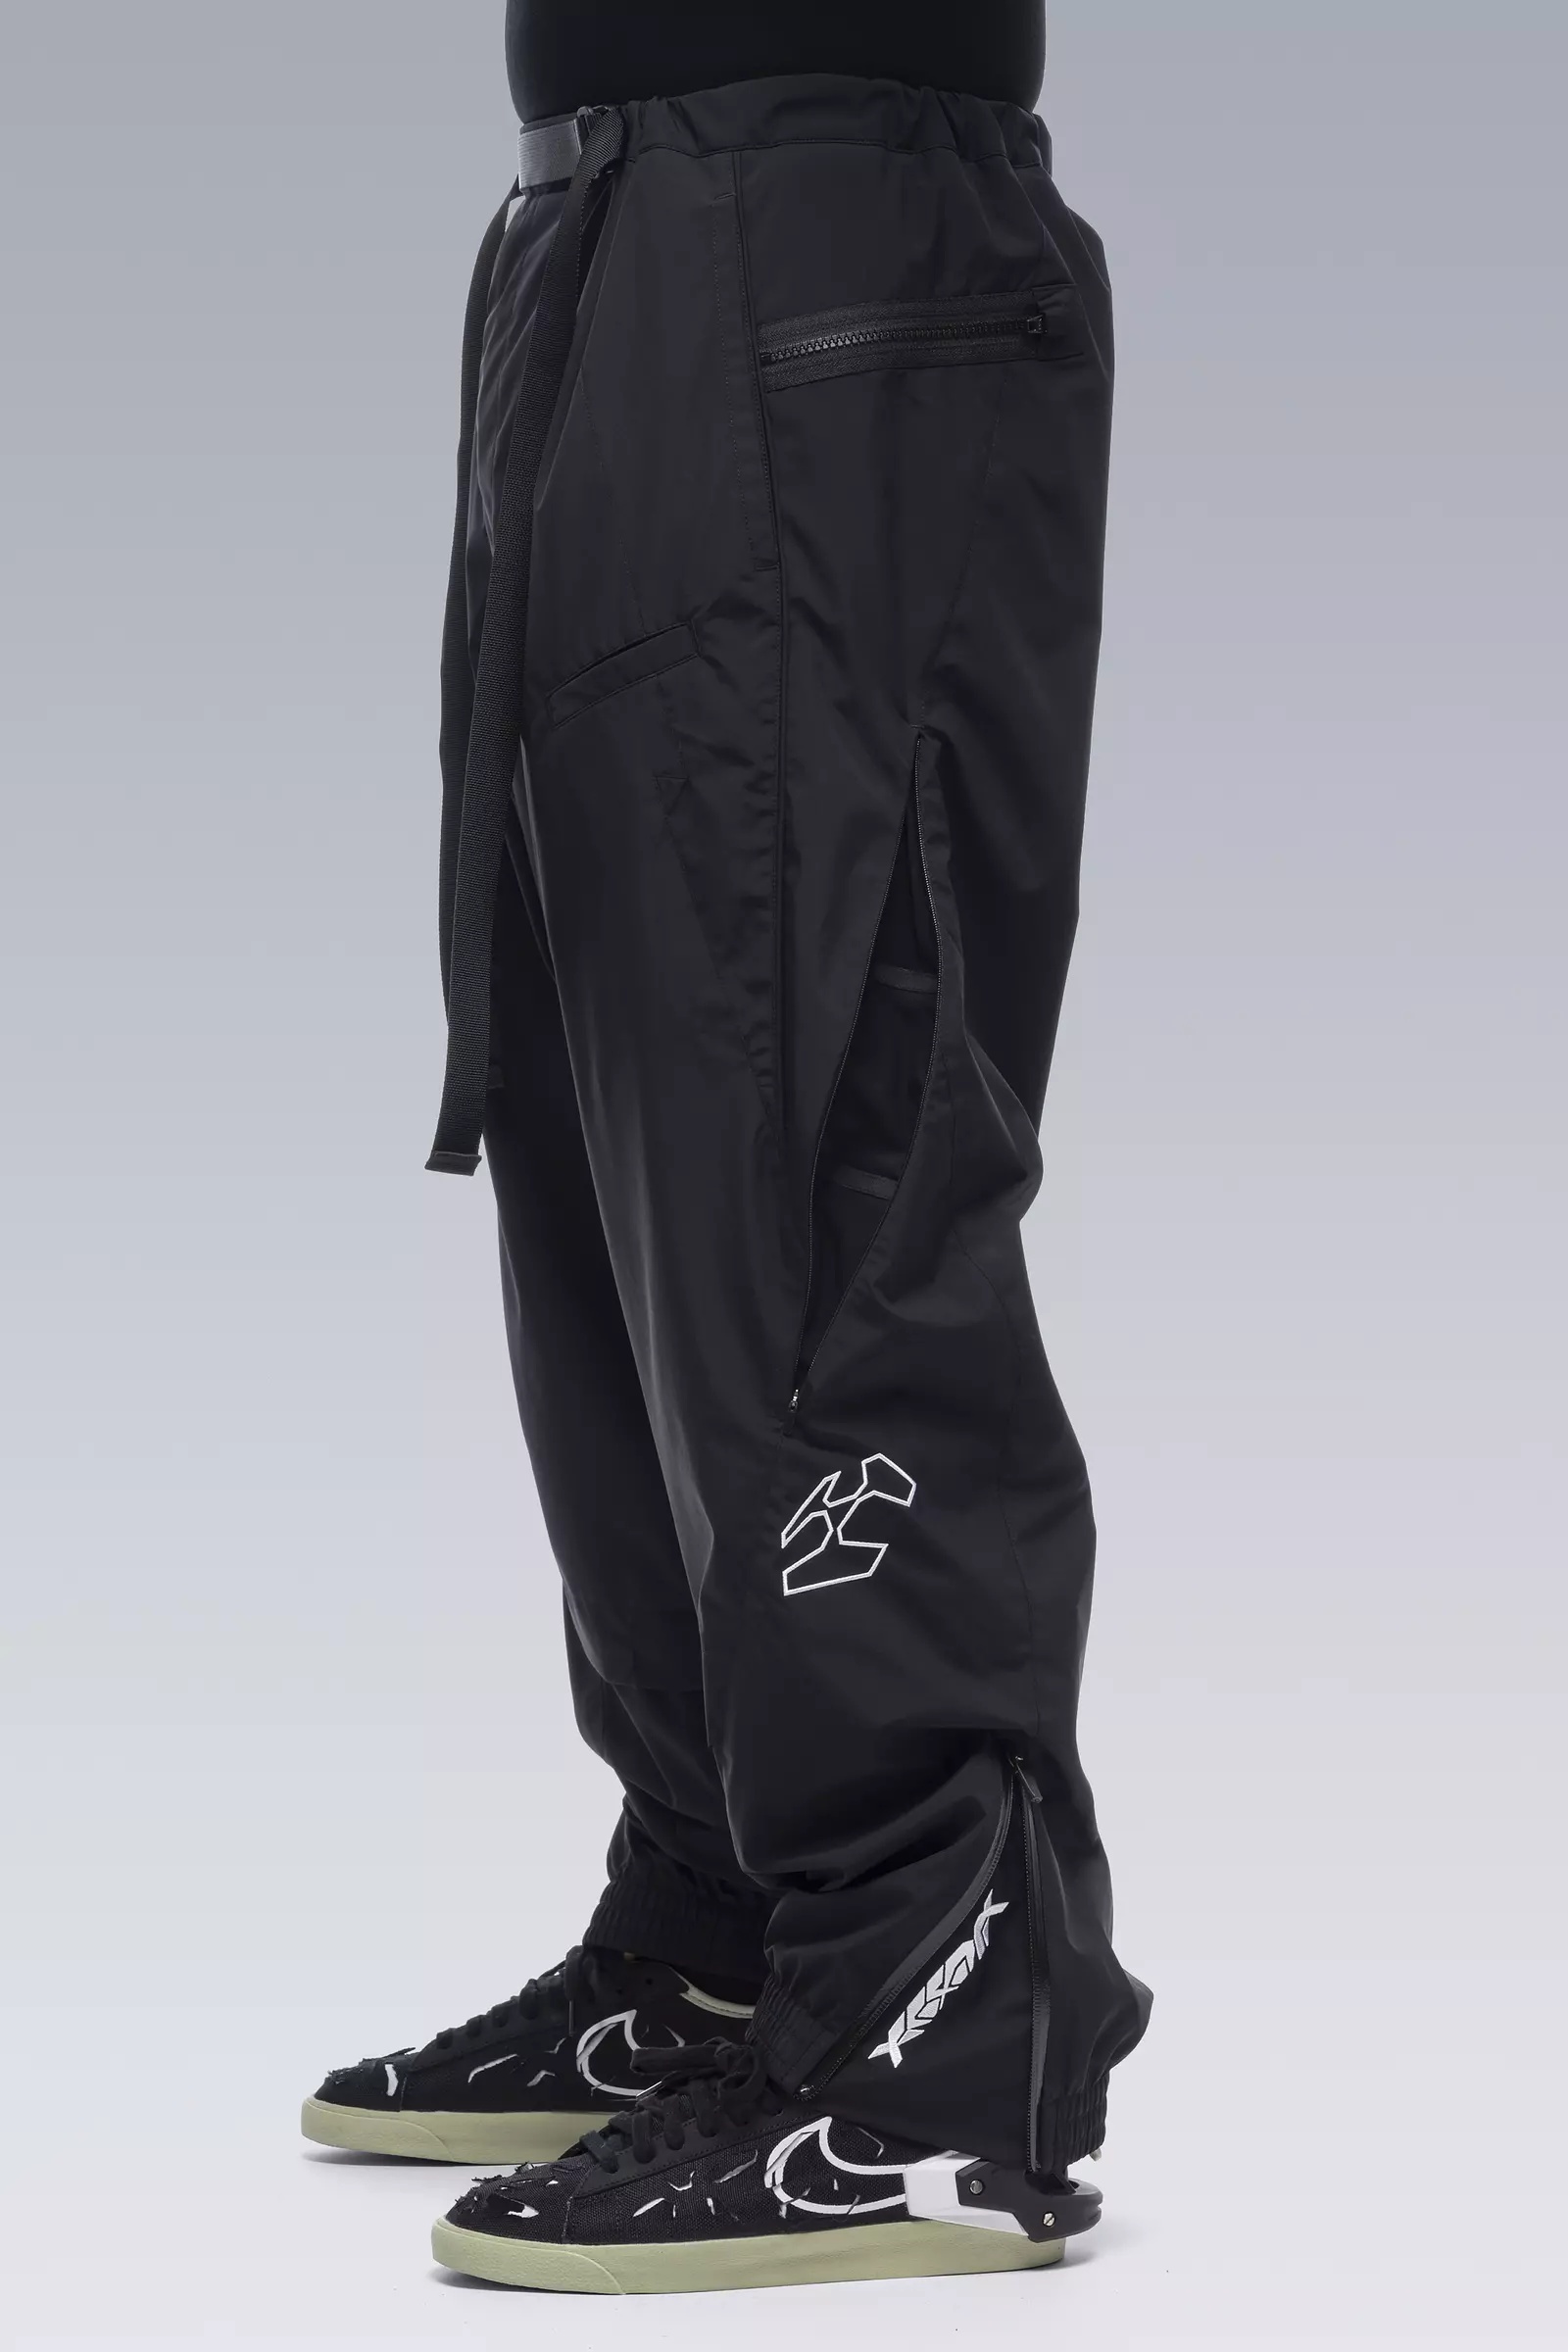 P53-WS 2L Gore-Tex® Windstopper® Insulated Vent Pants Black - 11